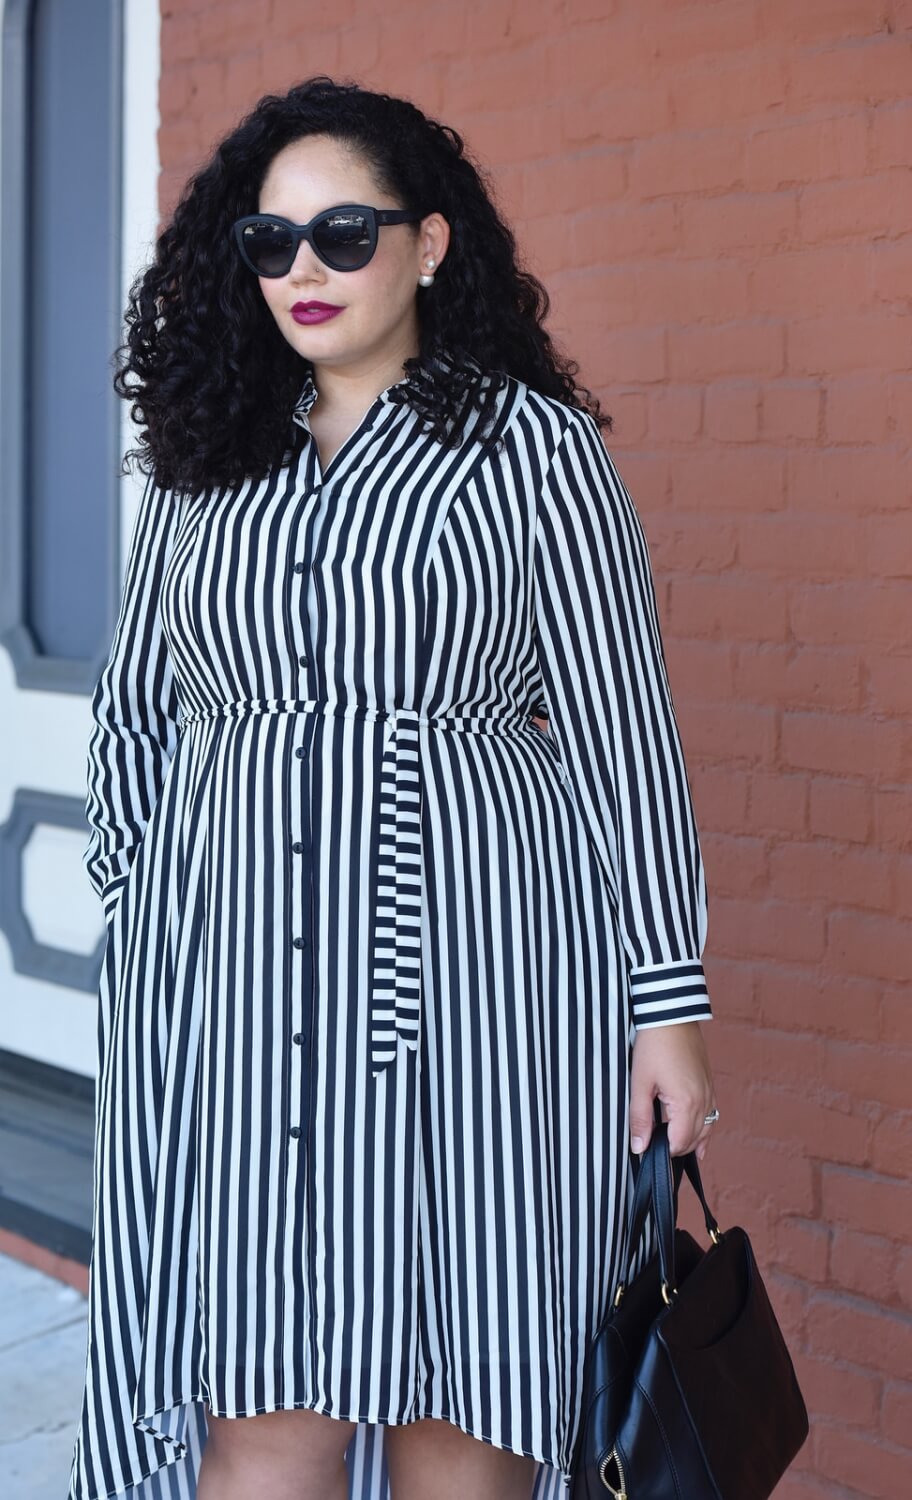 This Dress Proves Stripes Can Be Super Flattering | Girl With Curves